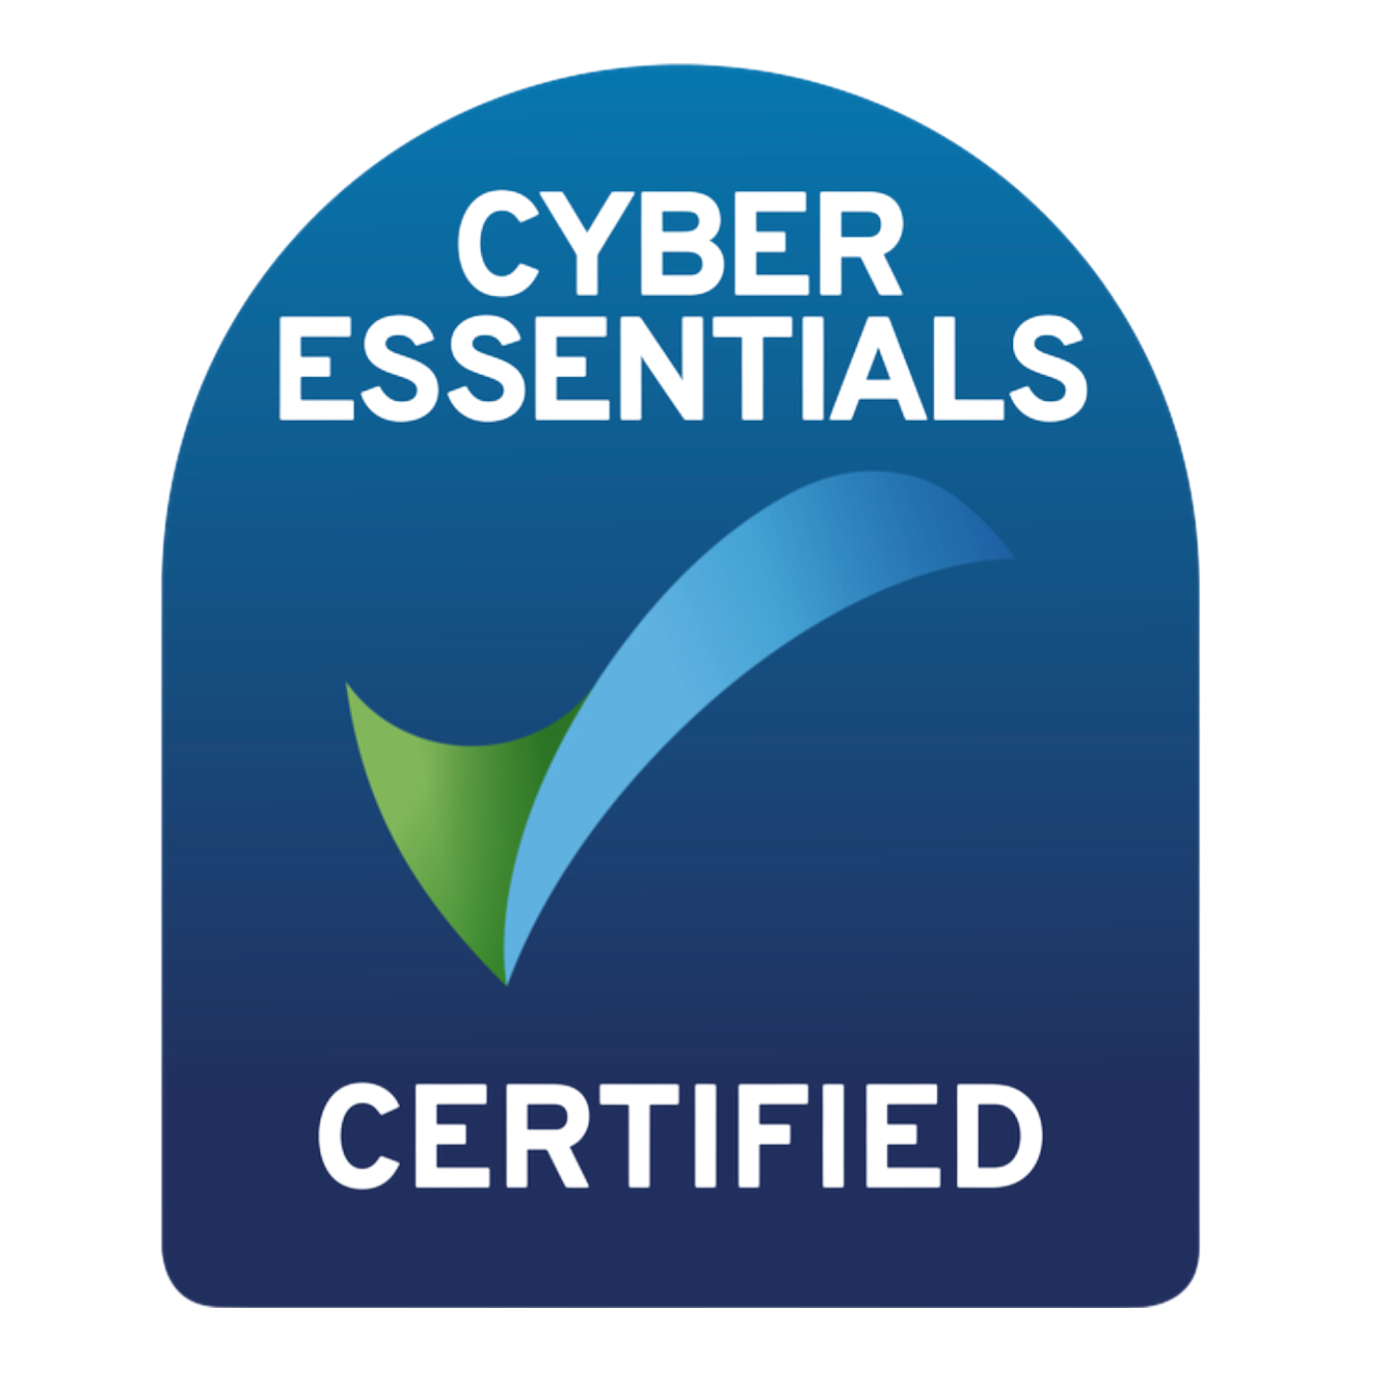 a logo for cyber essentials with a check mark